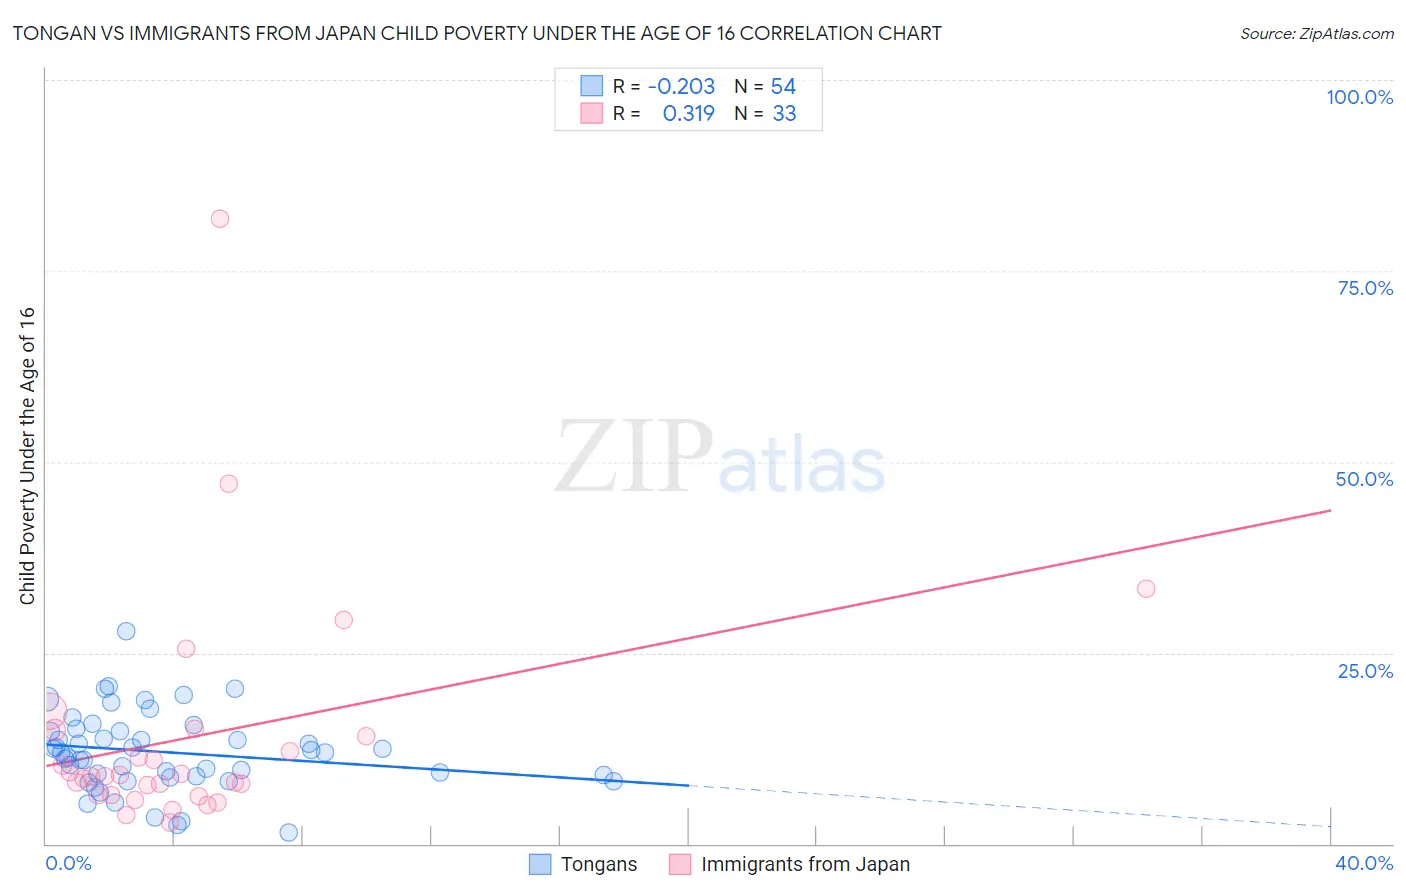 Tongan vs Immigrants from Japan Child Poverty Under the Age of 16